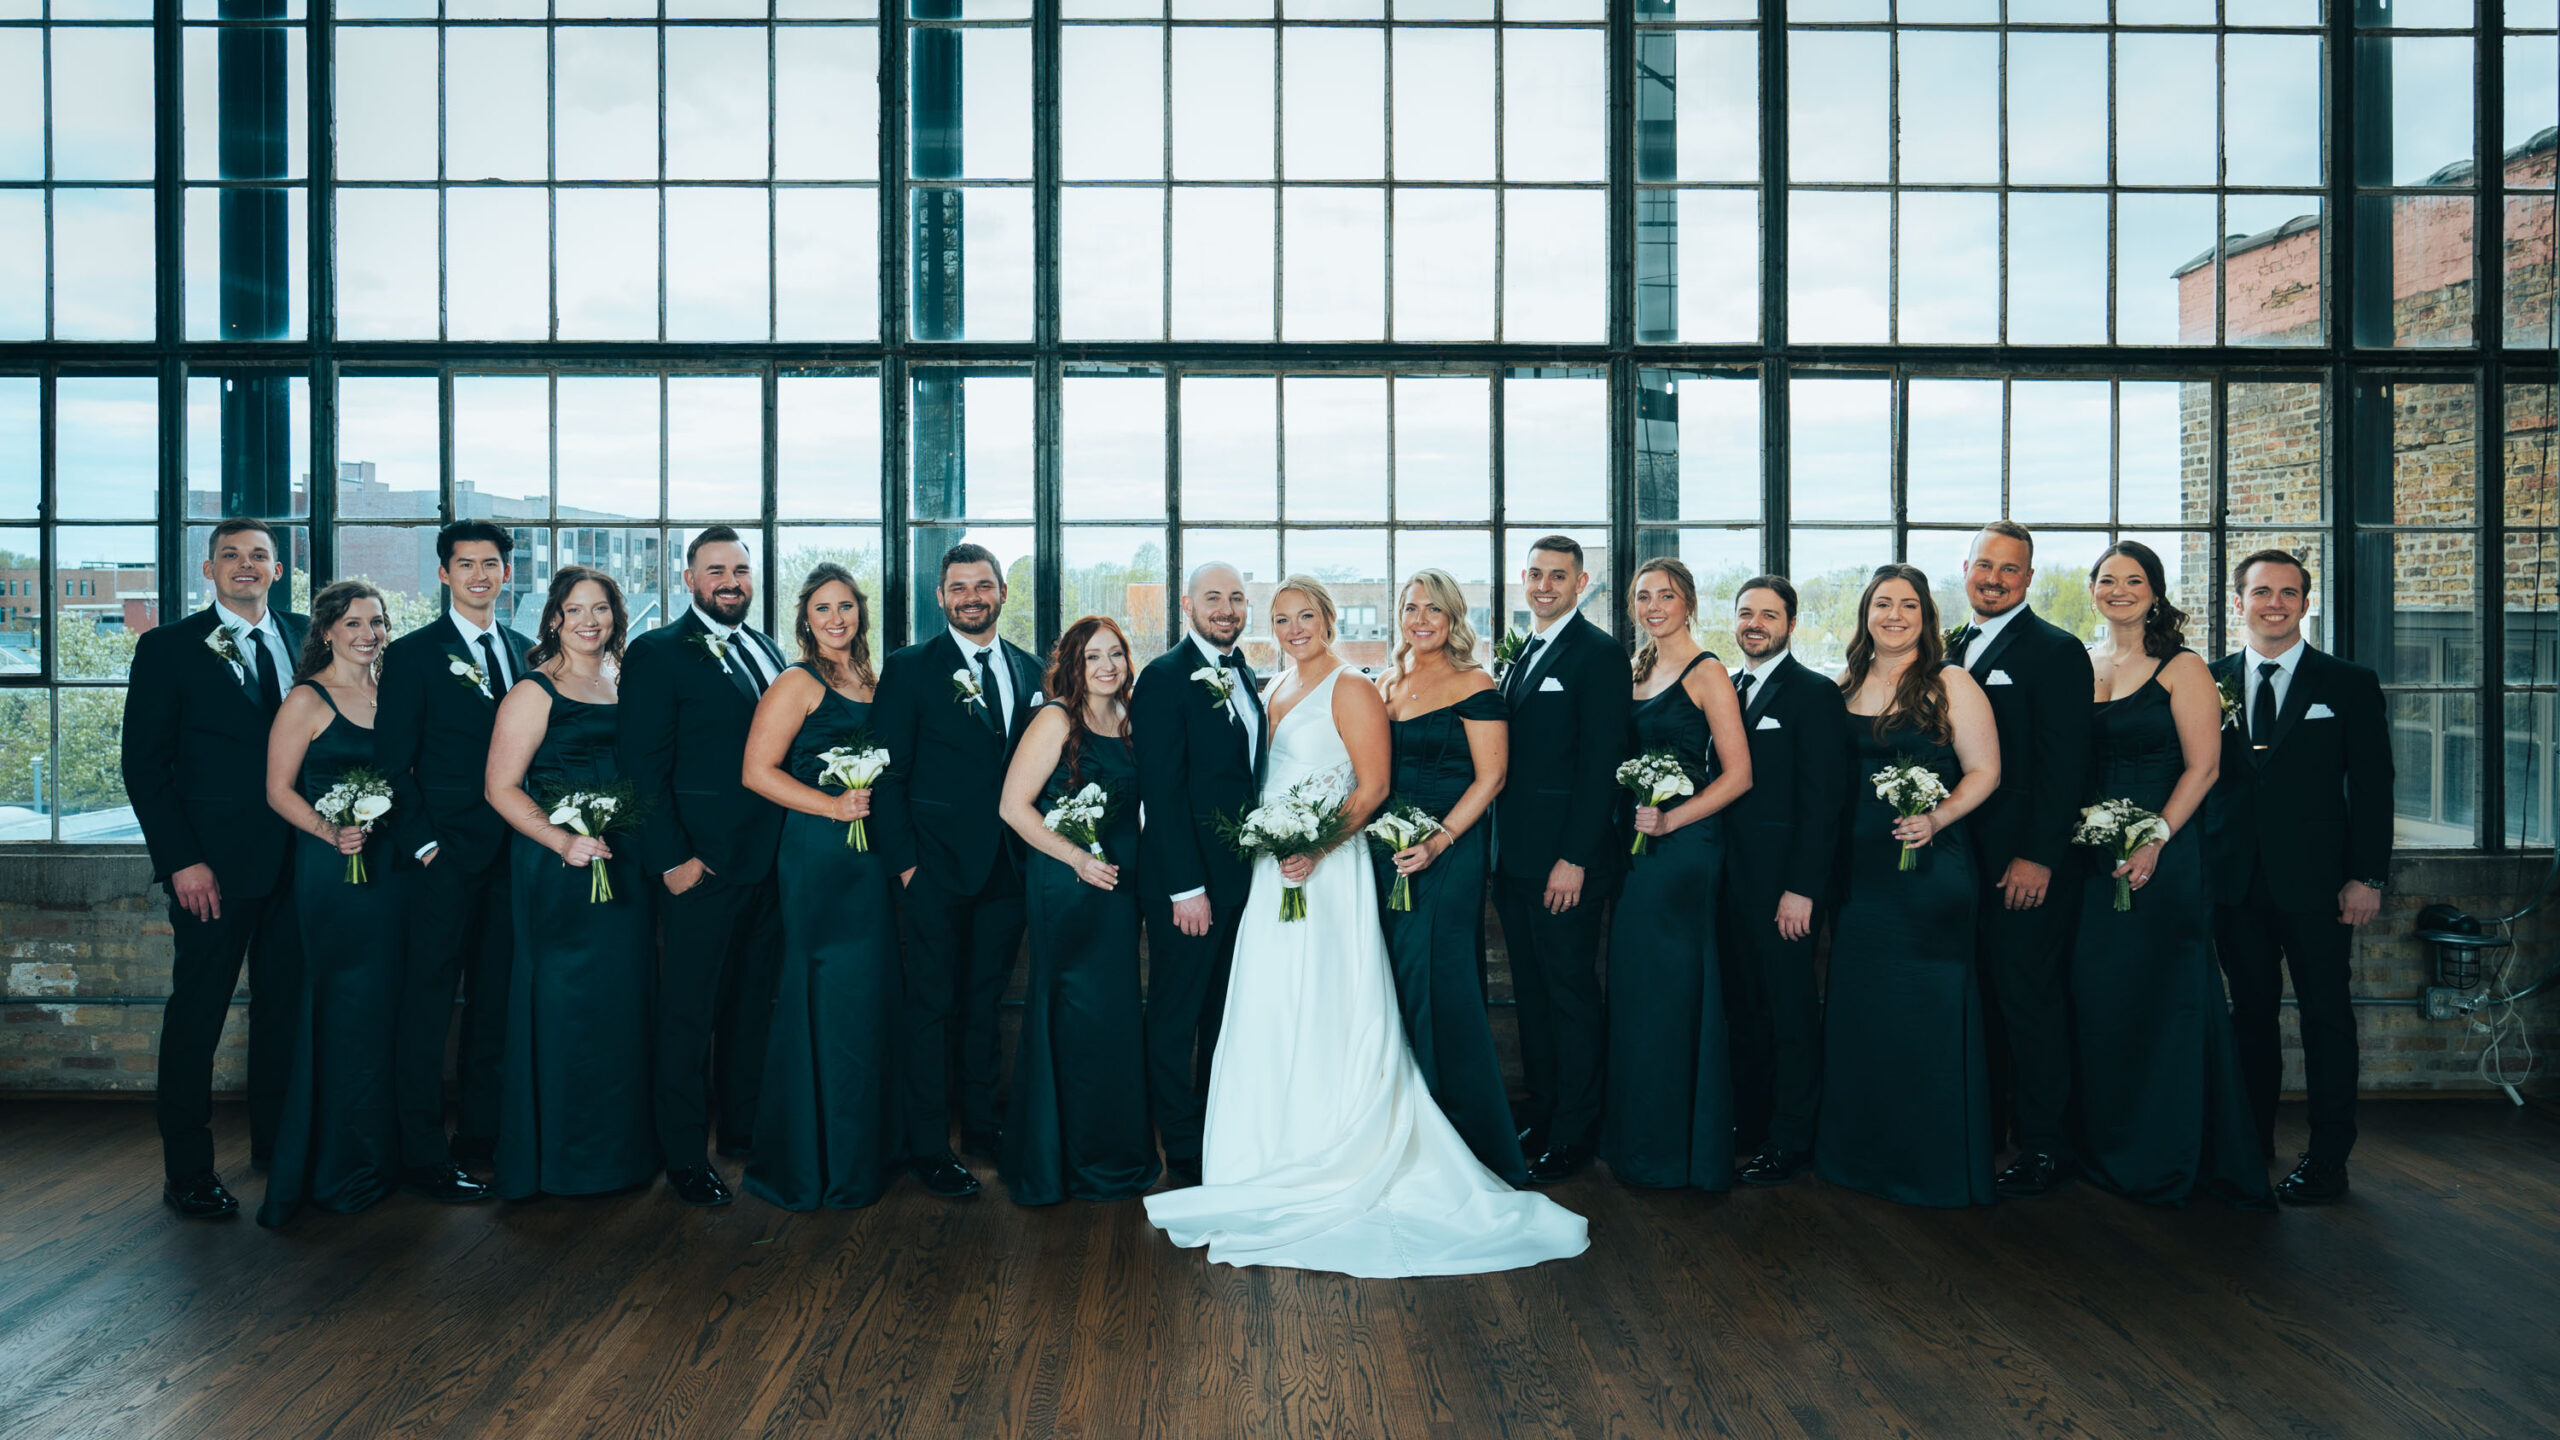 Choose Your Wedding Photography Styles